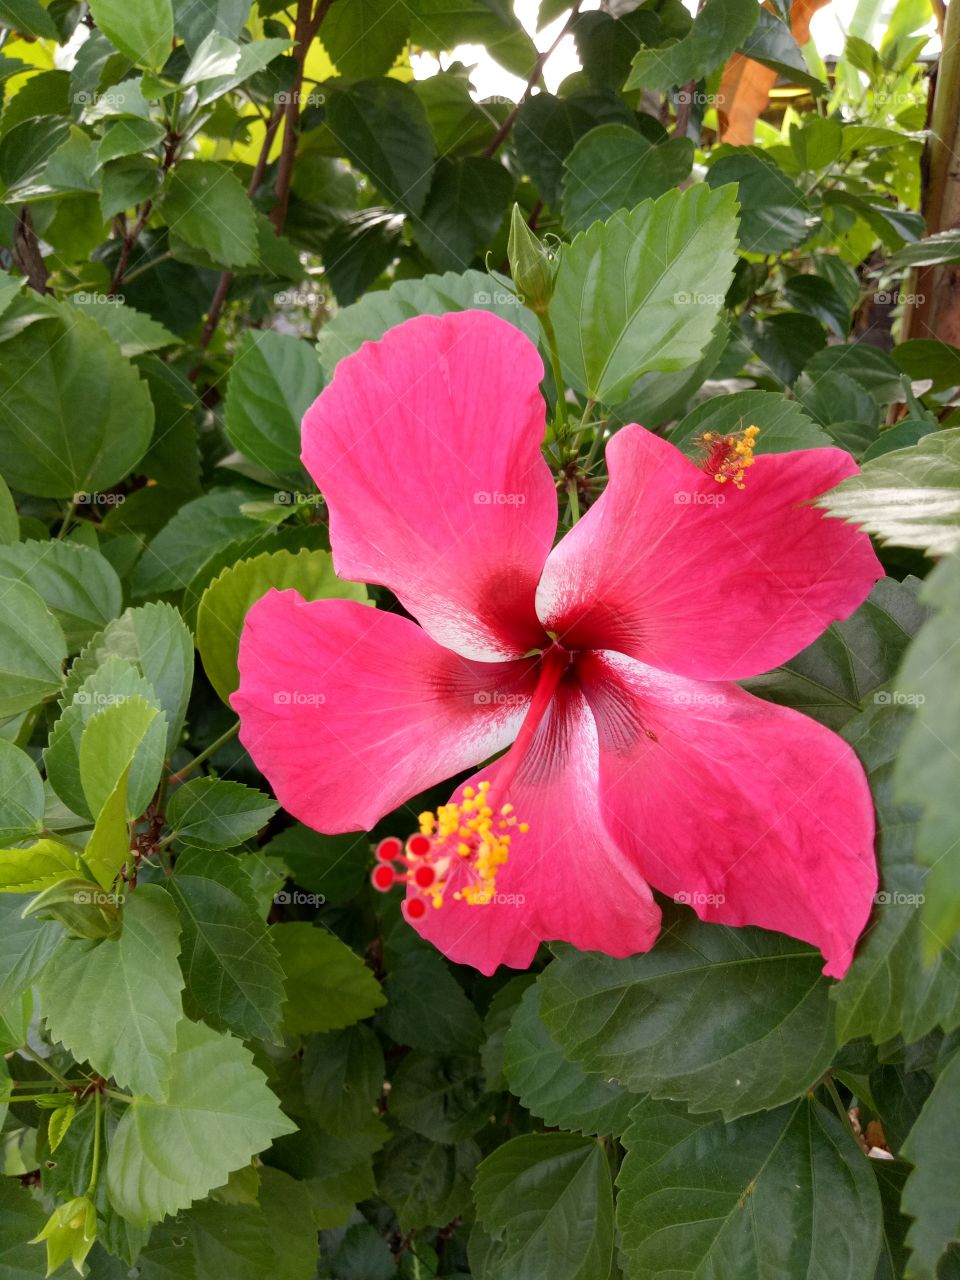 Hibiscus blooming National Flower of Malaysia